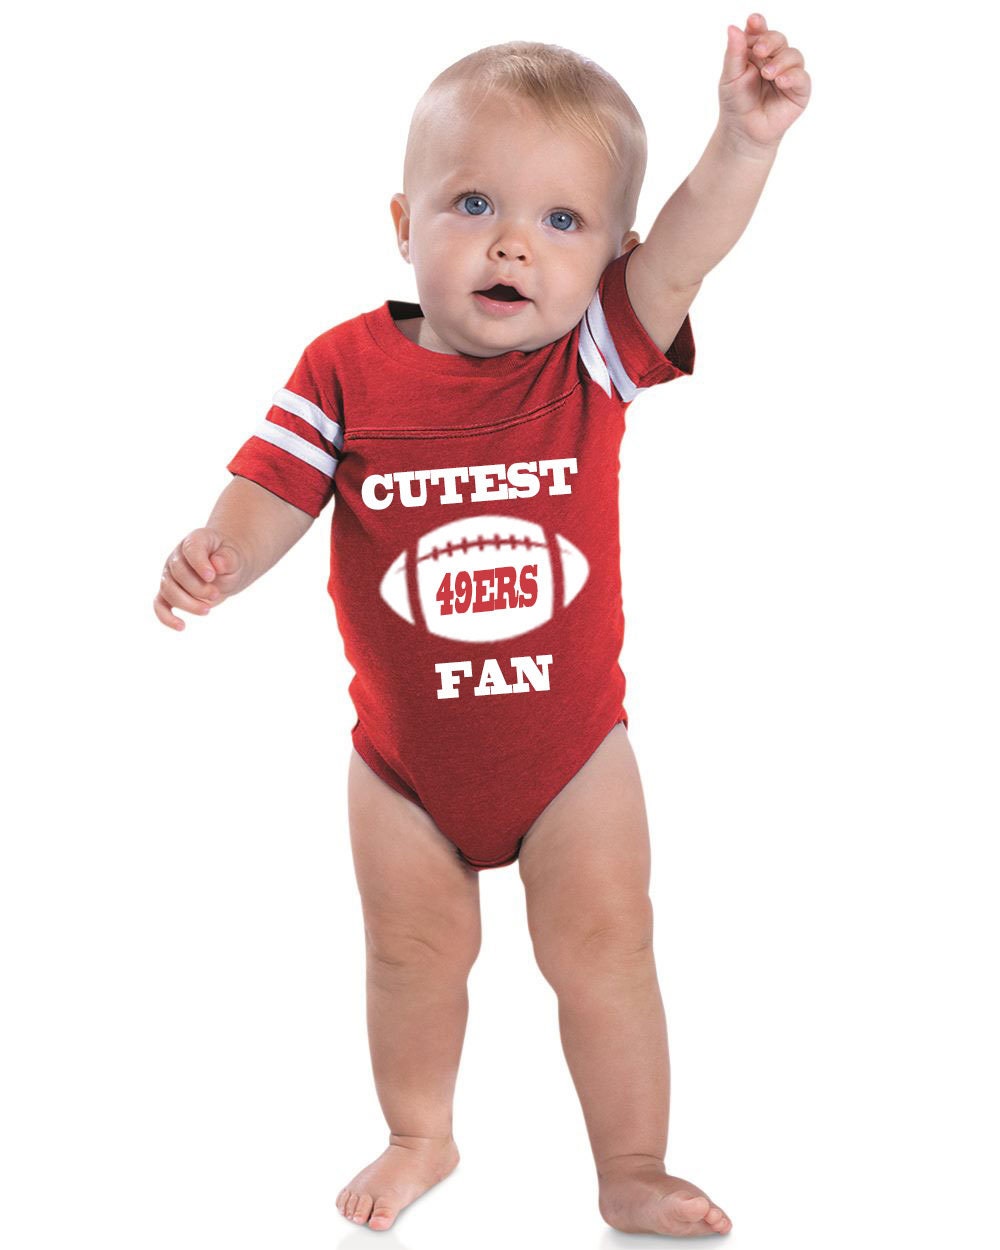 Cutest 49ERS Fan A Custom Red and White Football Jersey Baby | Etsy